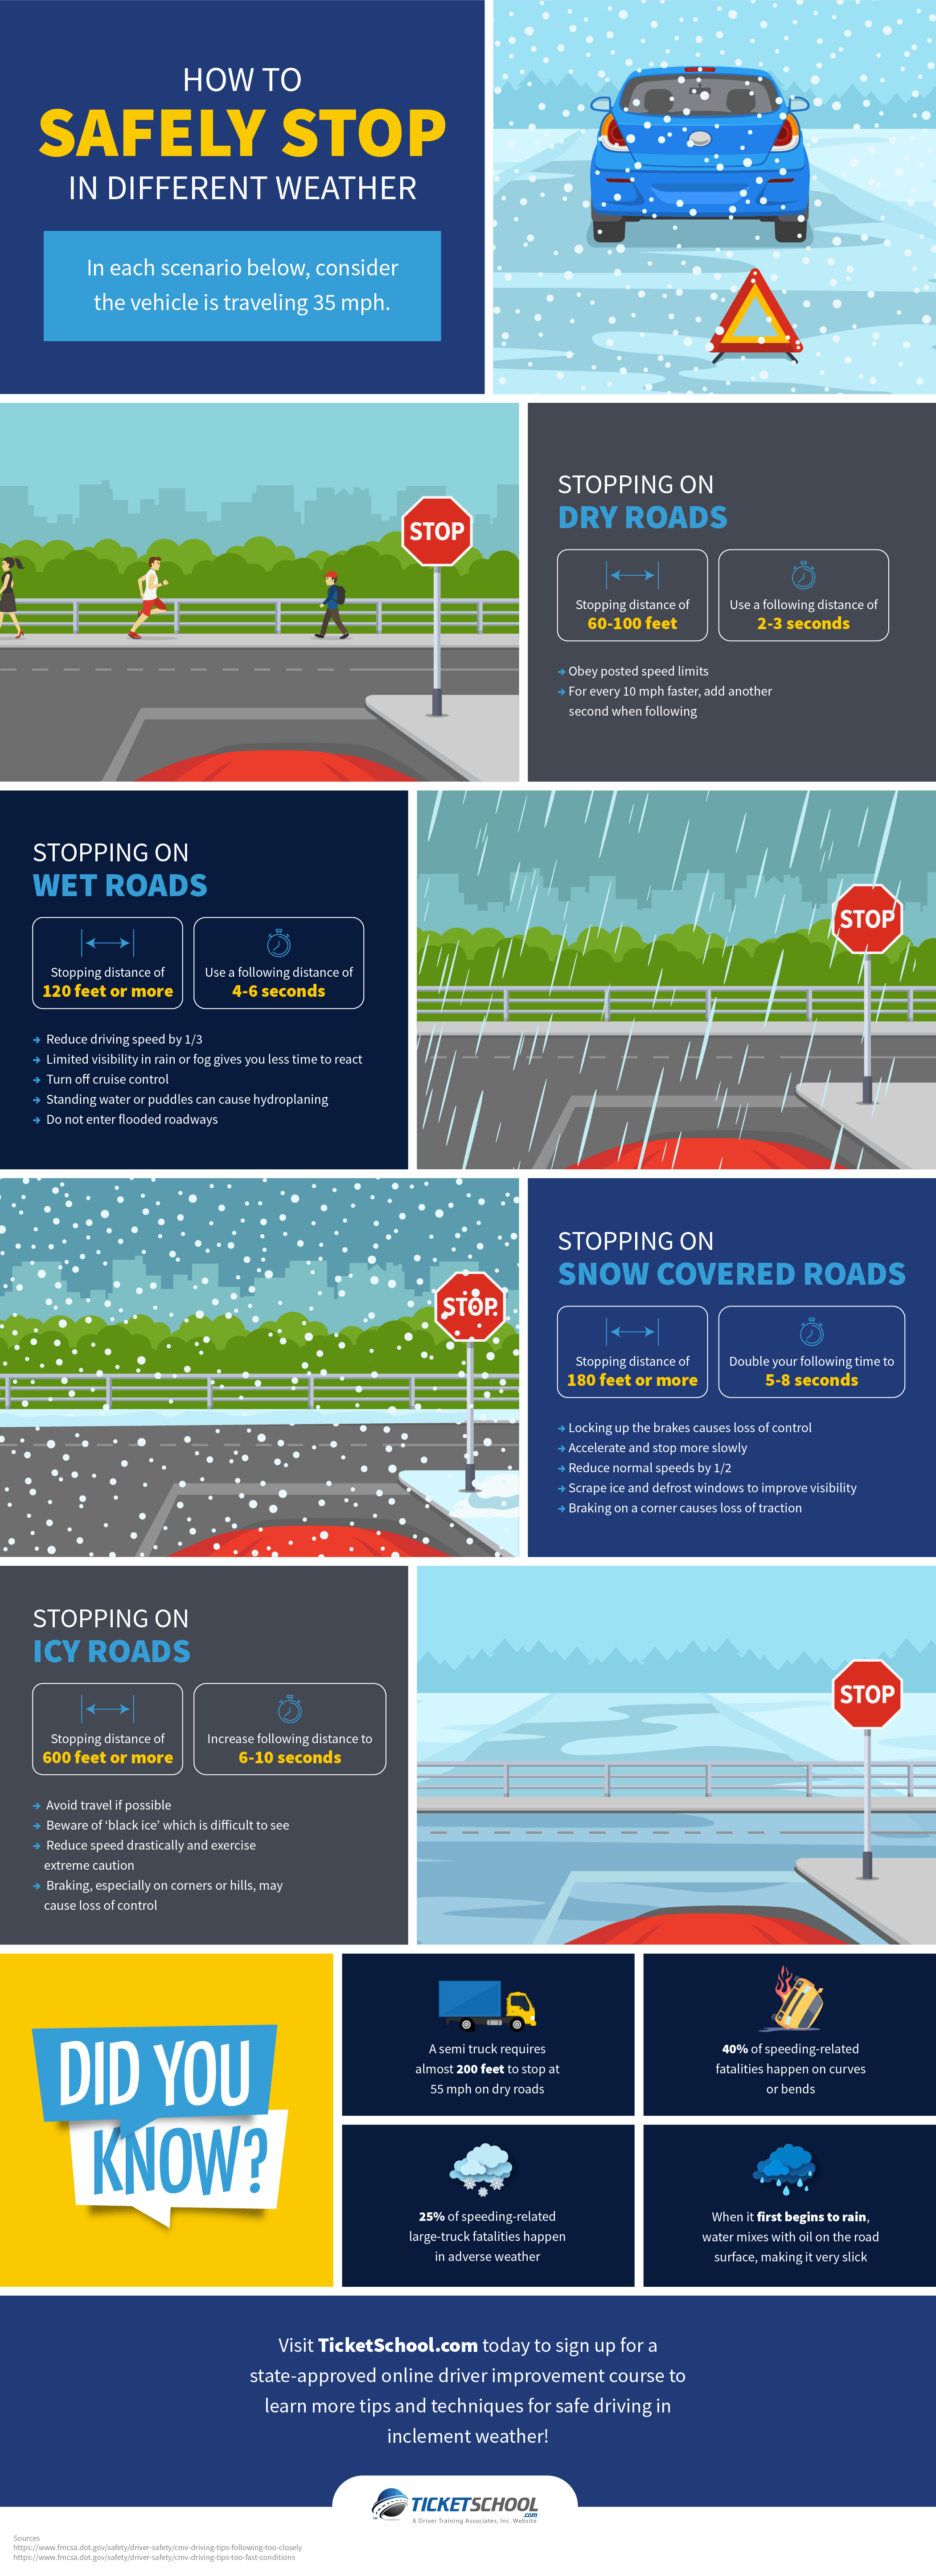 How to Safely Stop in Different Weather Infographic